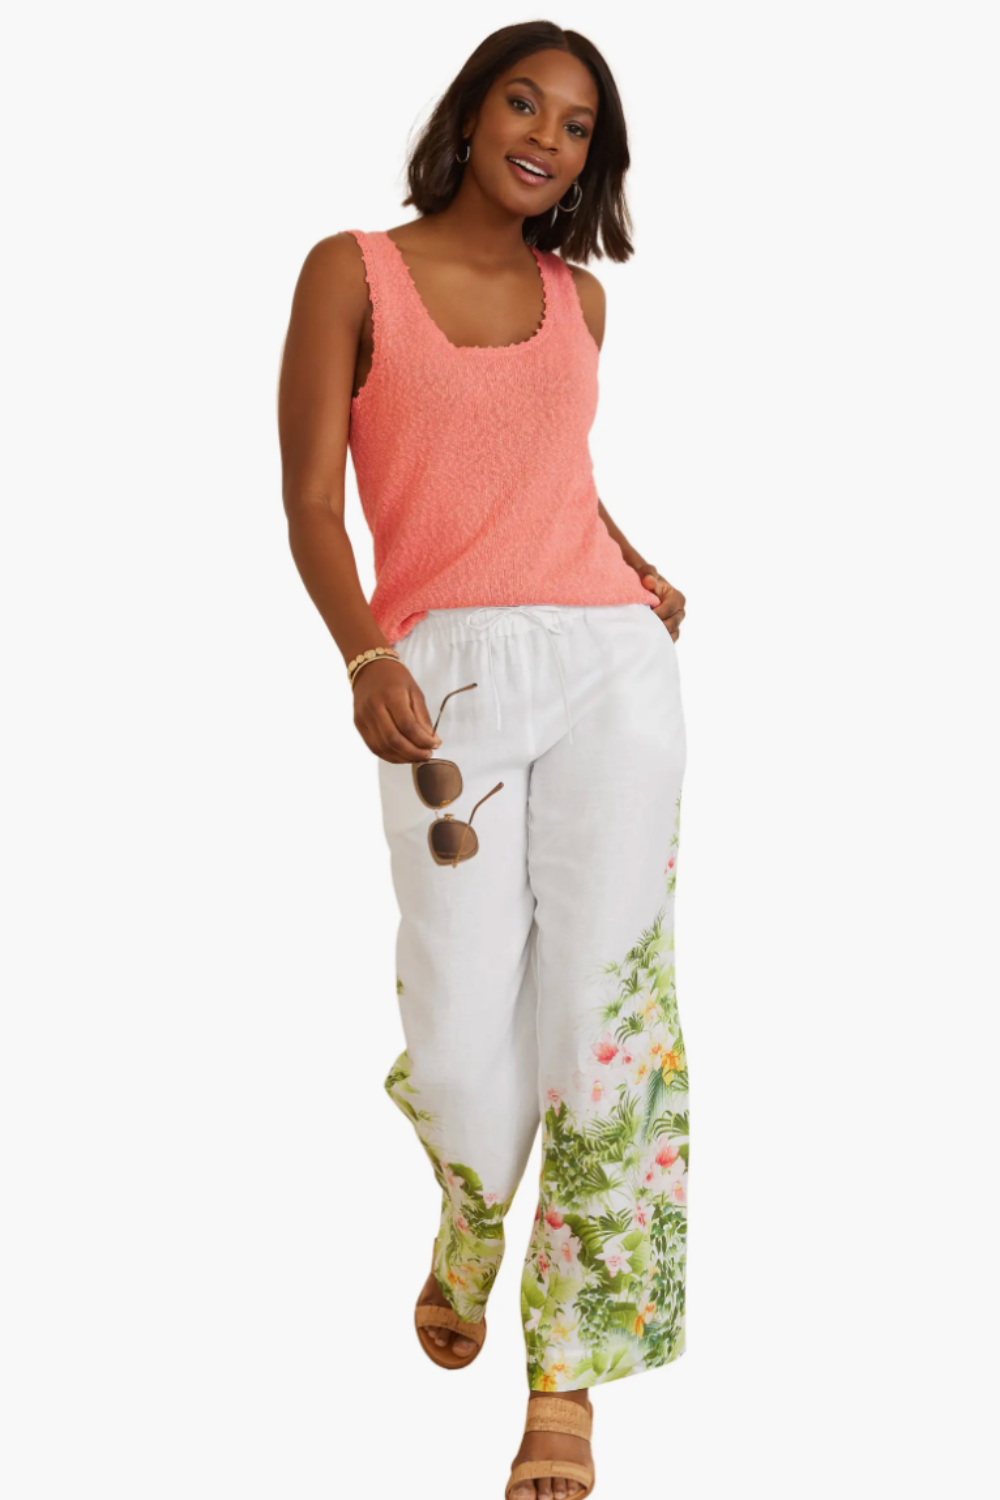 Tommy Bahama Flora Riviera Easy Pants - White